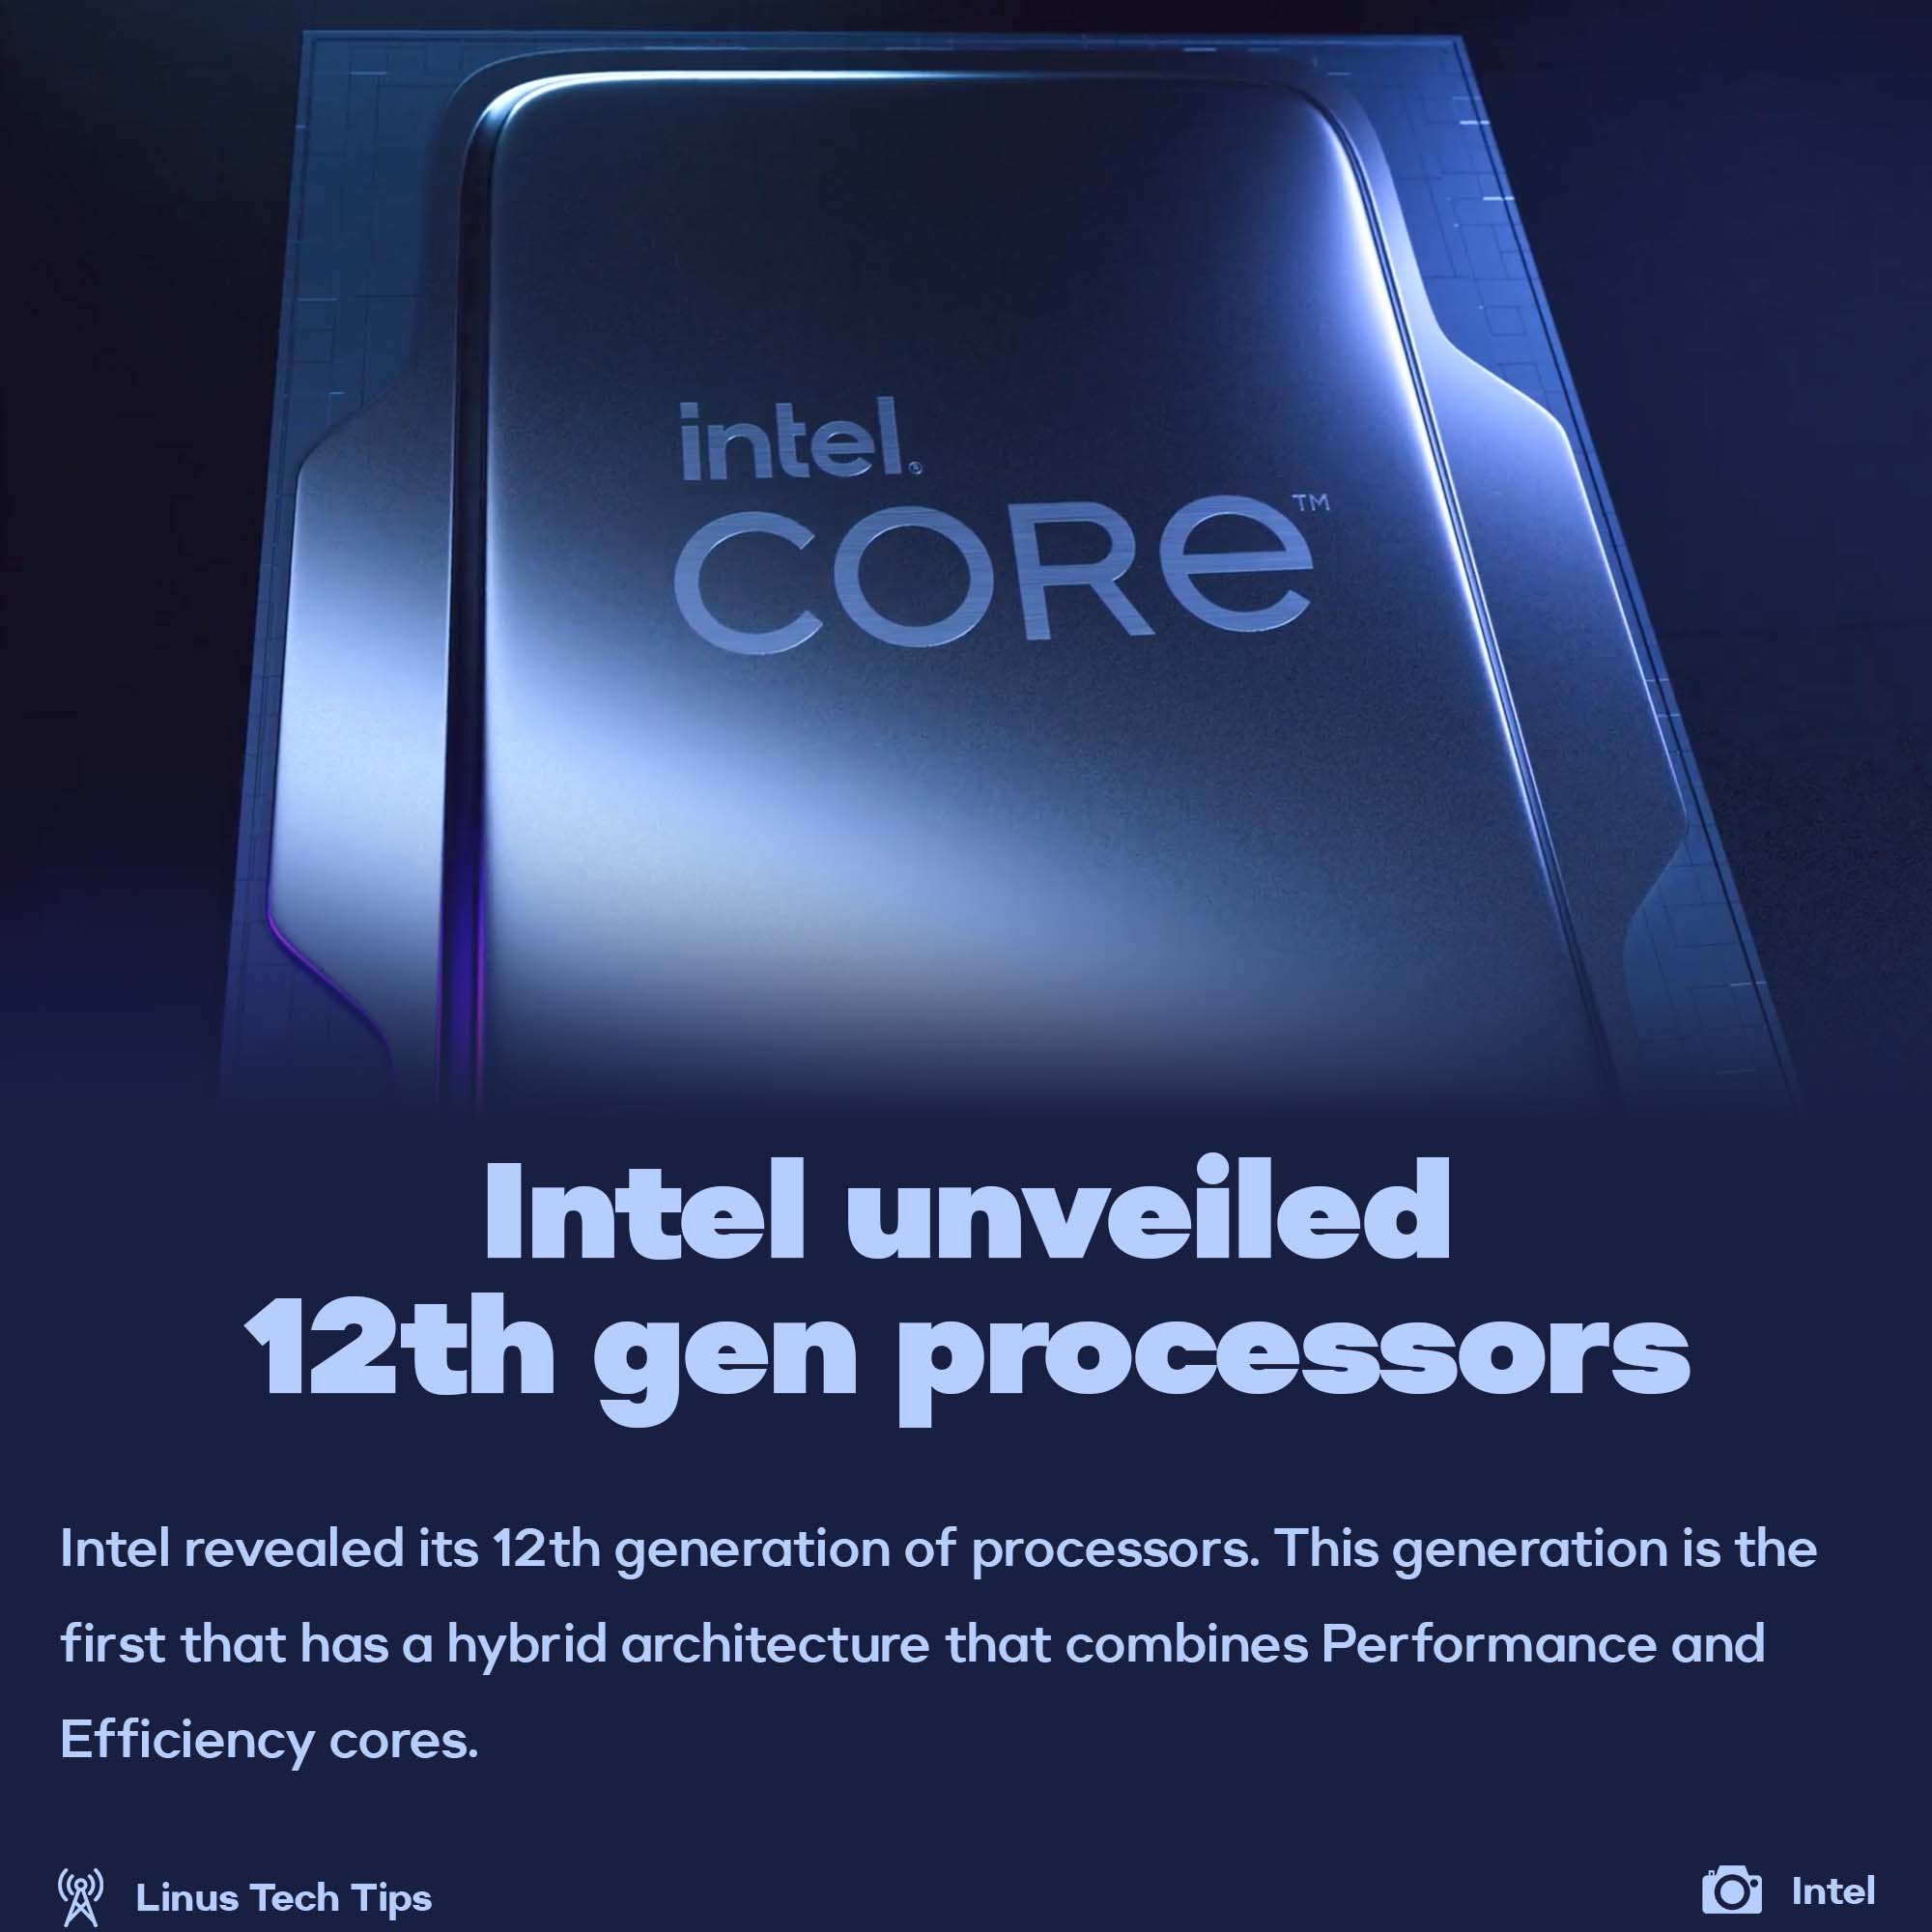 Intel announced 12th gen of their CPUs with a hybrid architecture that has Performance and Efficiency cores